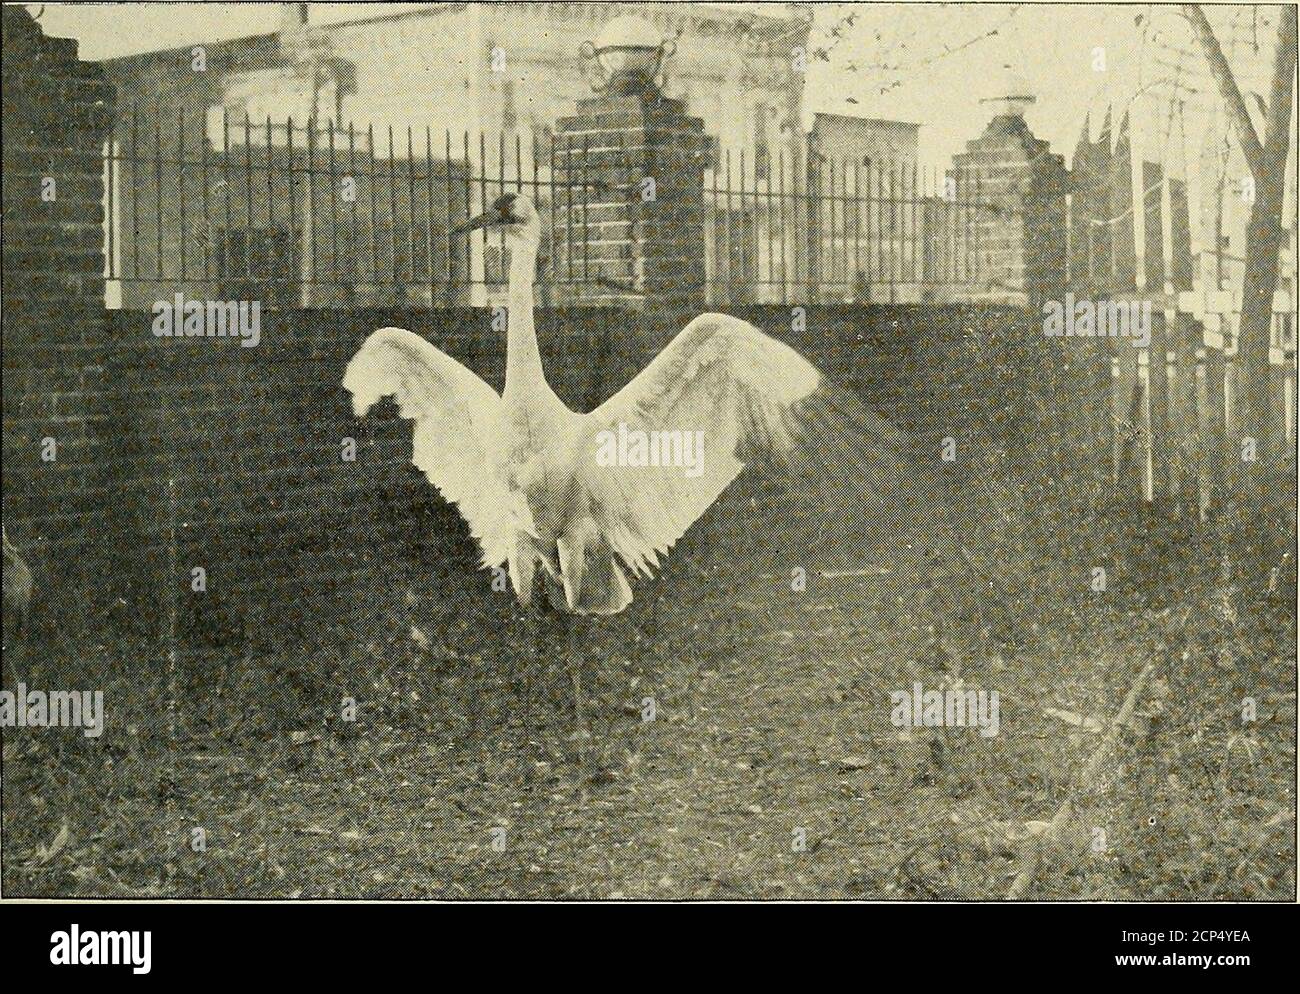 . The Oölogist: for the student of birds, their nests and eggs . Only Known Whopping Cranes in Confinement, the Propertyof K. C. Beck & Co., Hutchison, Kansas. THE OOLOGIST 59. Close Up View of a Whooping Crane Objecting to Being Photo-graphed in the Park of K. C. Beck & Co., Hutchison, Kansas 60 THE OOLOGIST SOME NOTES ON THE LIGHT-FOOTED RAIL (Rallus levipes. A. 0. U. No. 210.1)The above species is one of the fastdisappearing birds of California. Al-ways a very locally distributedspecies. It is, or rather was confinedto the very few tidal marshes and la-goons of Southern California. The bird Stock Photo